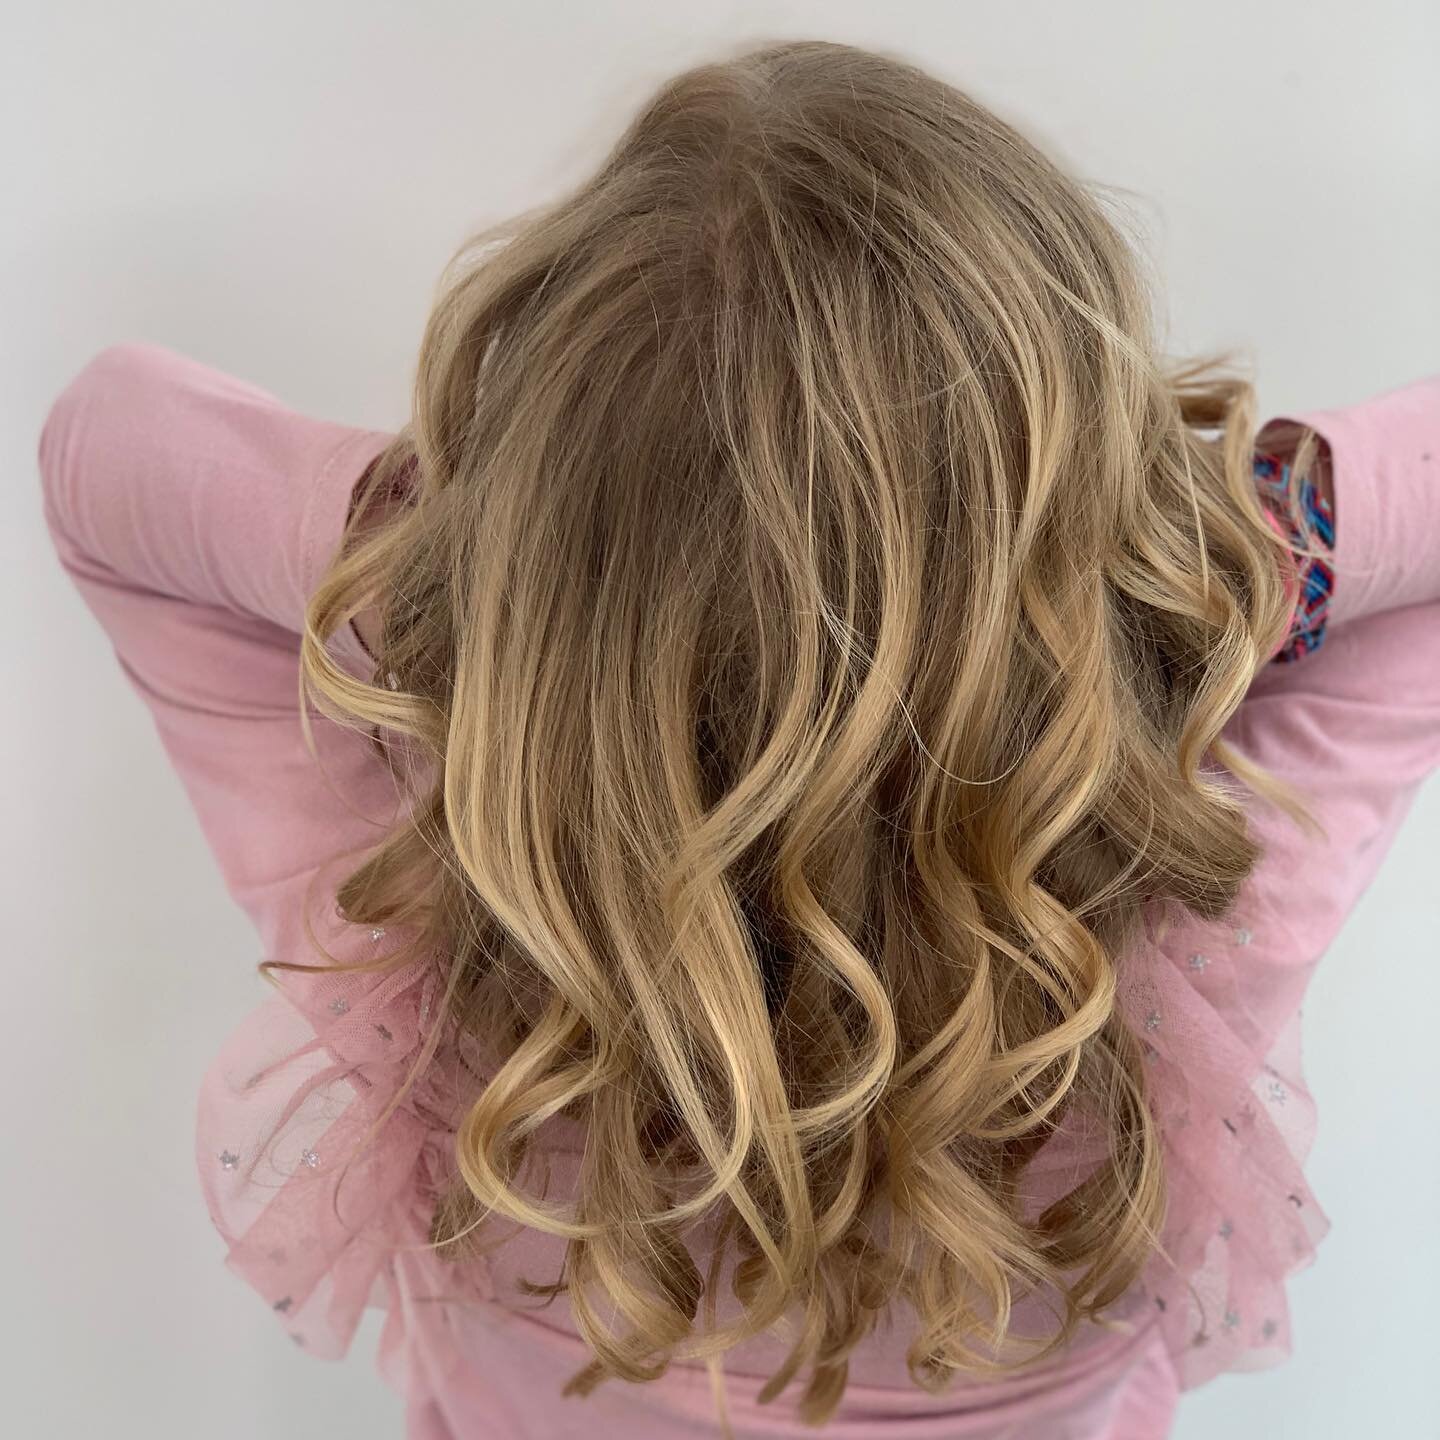 📸 Are you ready for picture day? With Back to School in full swing, don&rsquo;t forget to make sure your students are ready for that forever memory.

Book online now. Link in bio.

Hair by @hairbybettyford 

#pdxkids #kidscut #backtoschoolhair #jrha